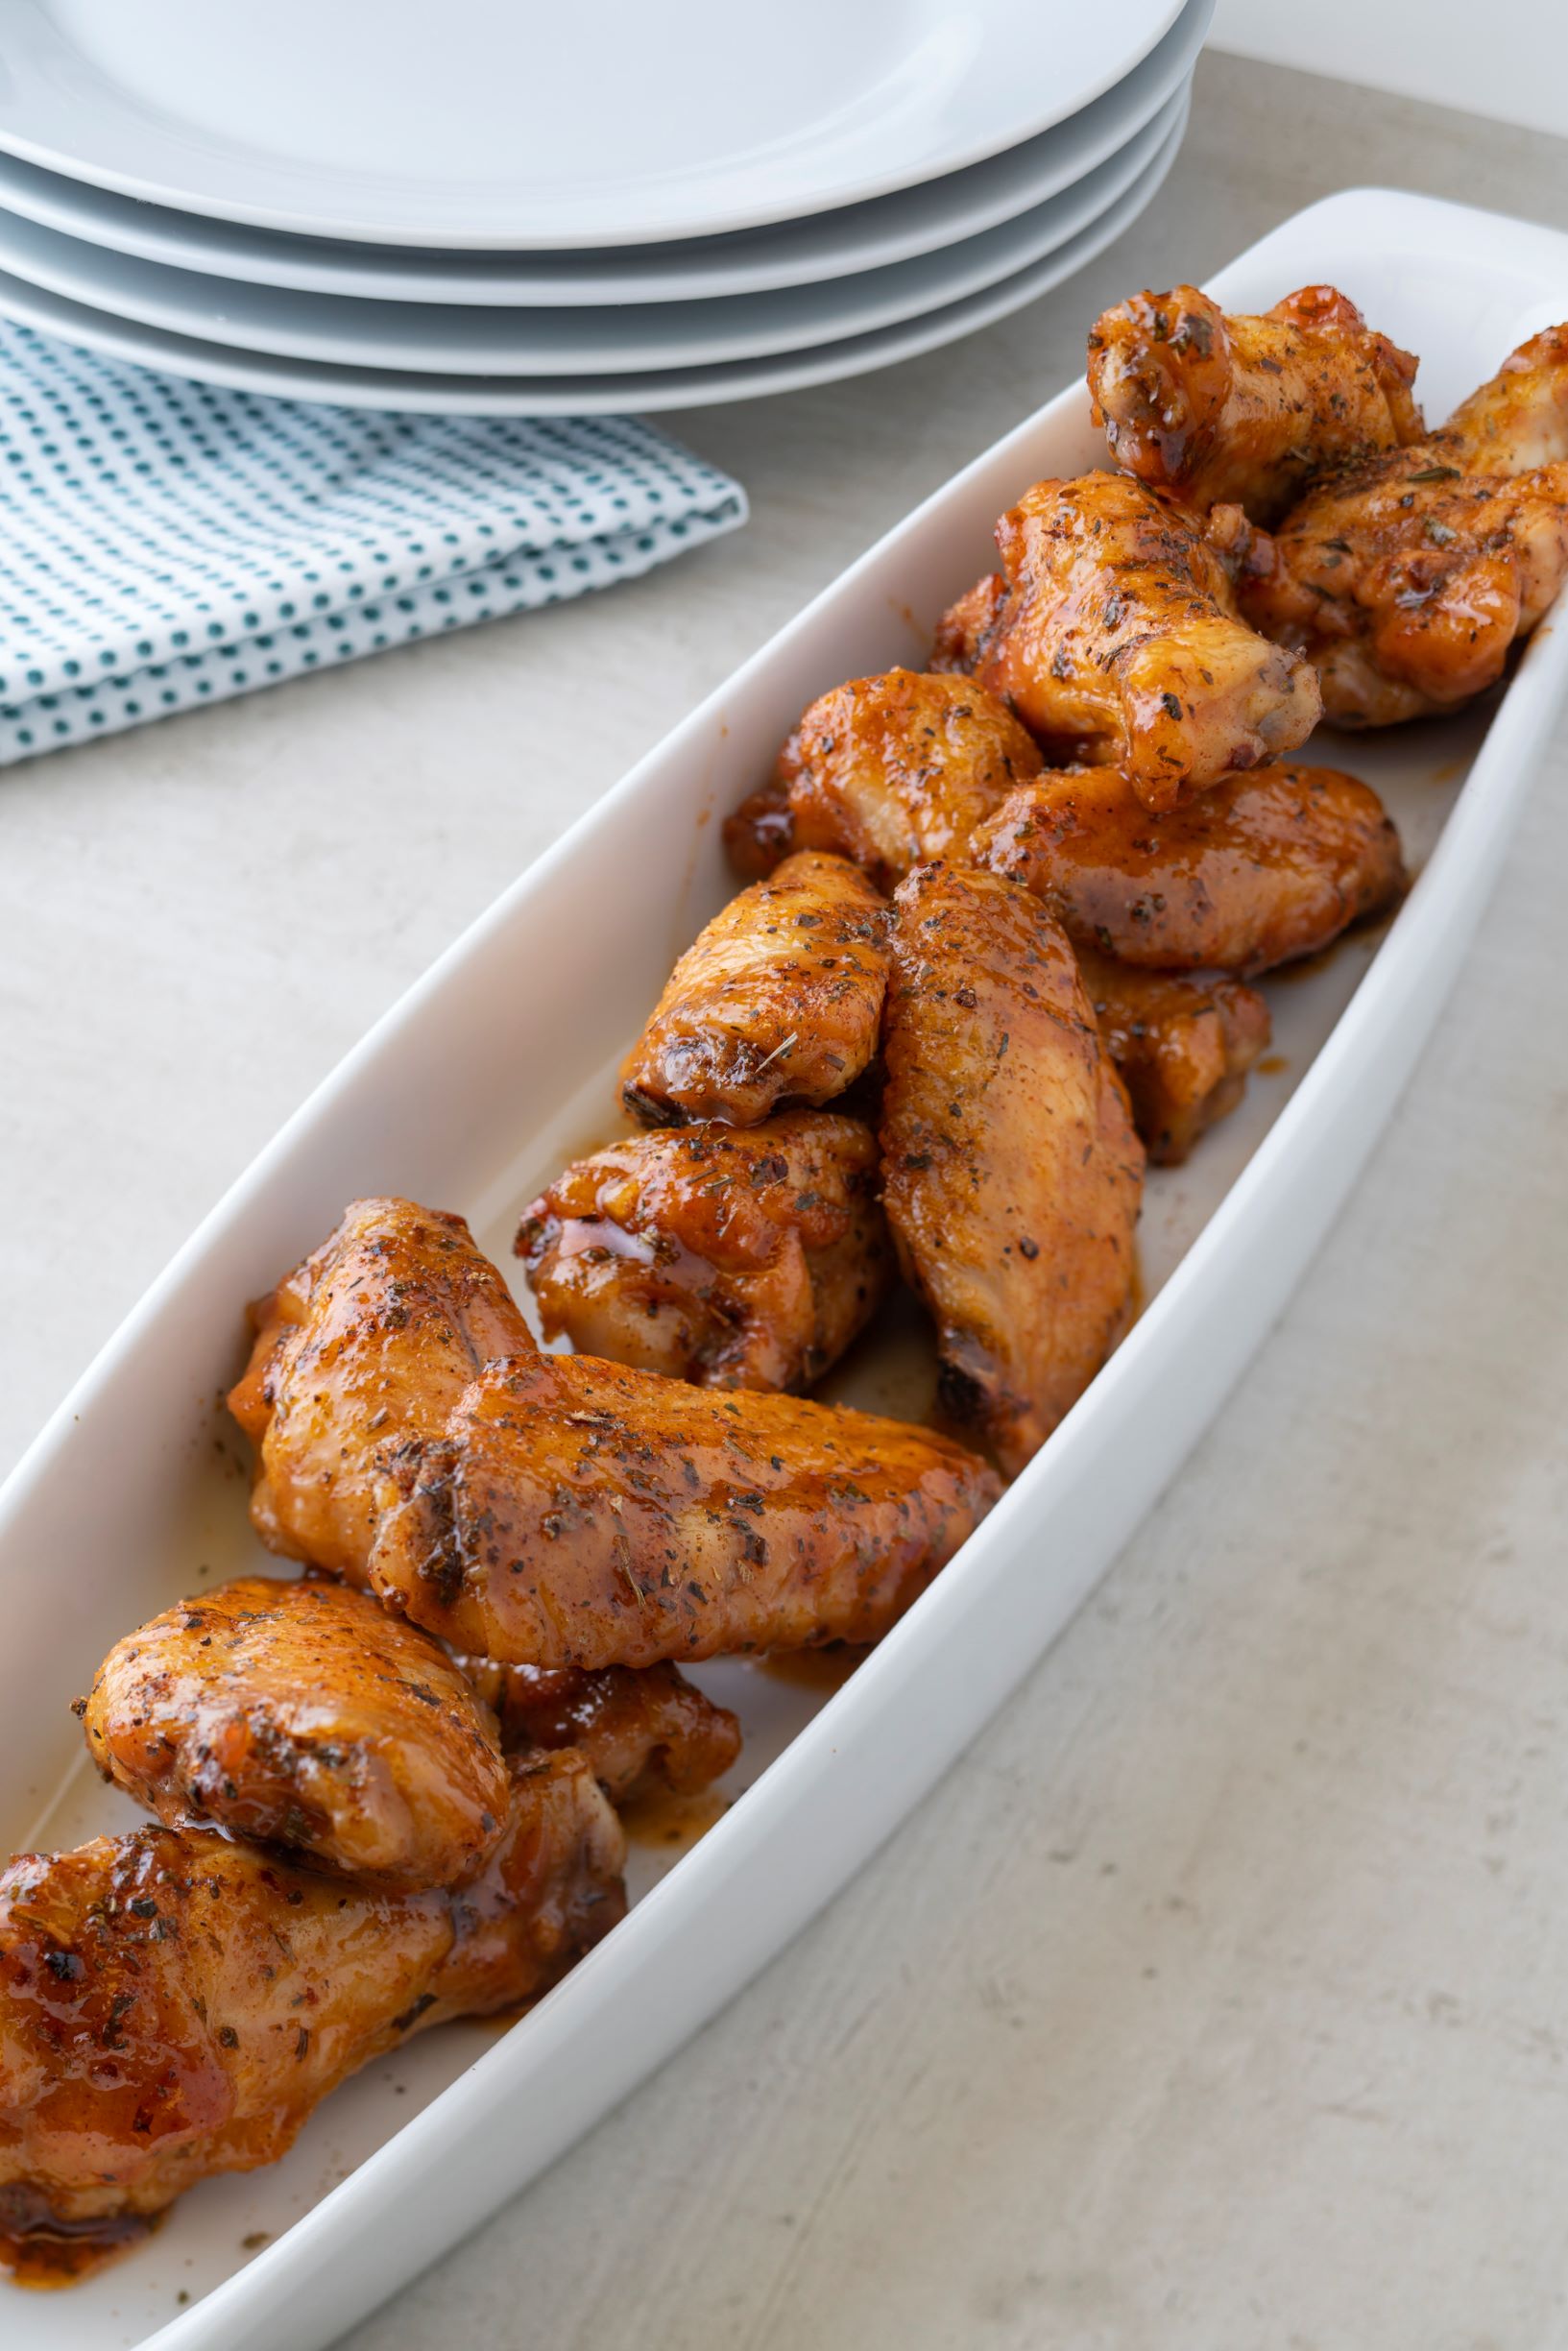 a serving dish of sweet basil and tarragon buffalo wings, including drumsticks and legs